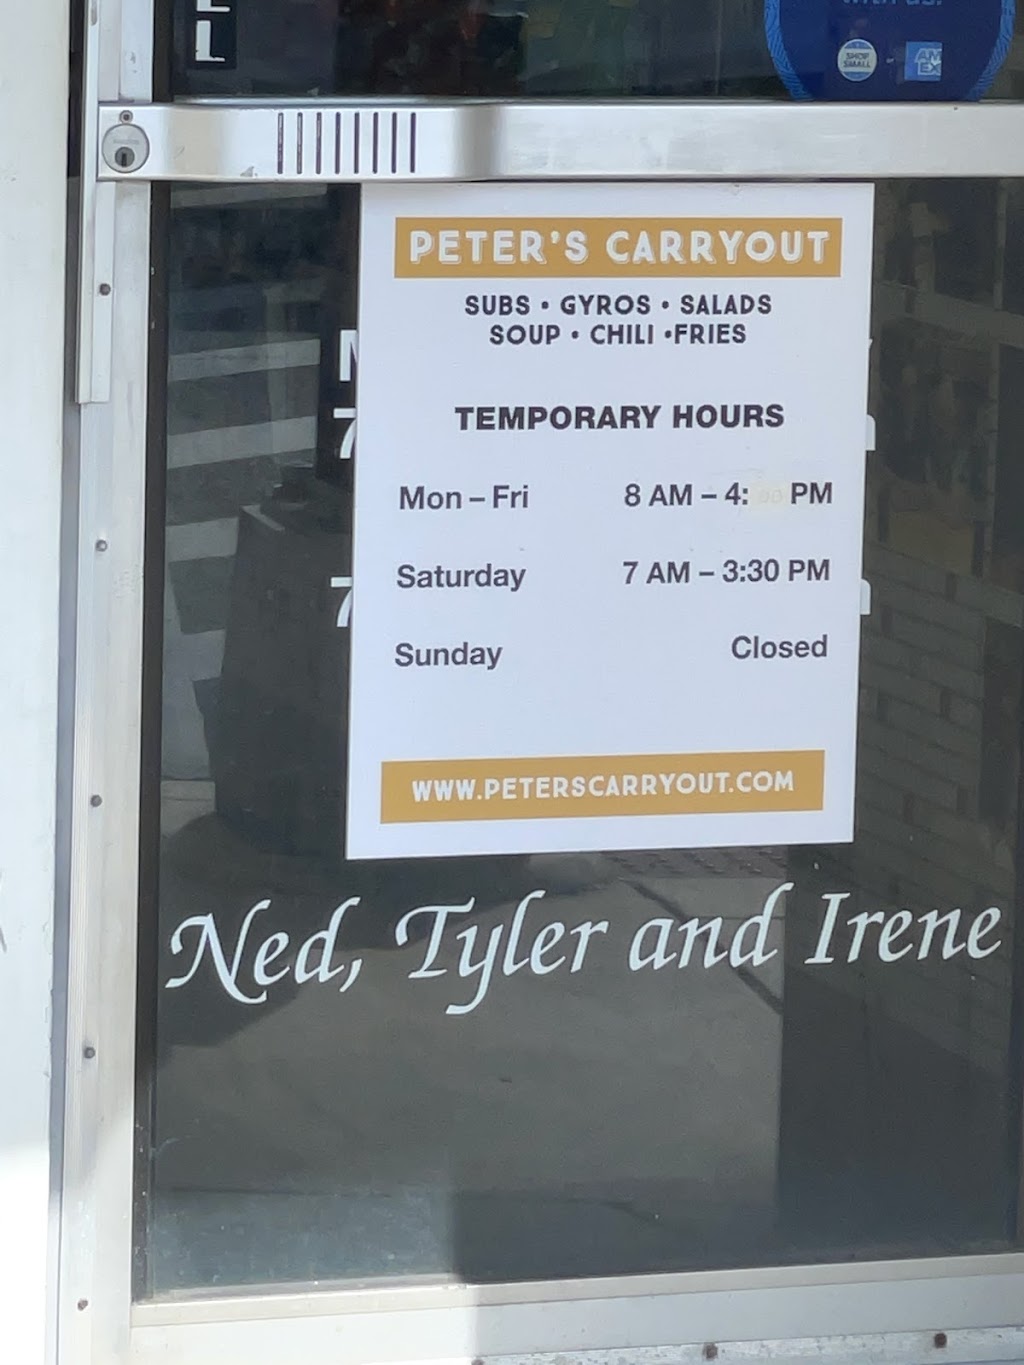 Peters Carryout | 8017 Wisconsin Ave, Bethesda, MD 20814, USA | Phone: (301) 656-2242